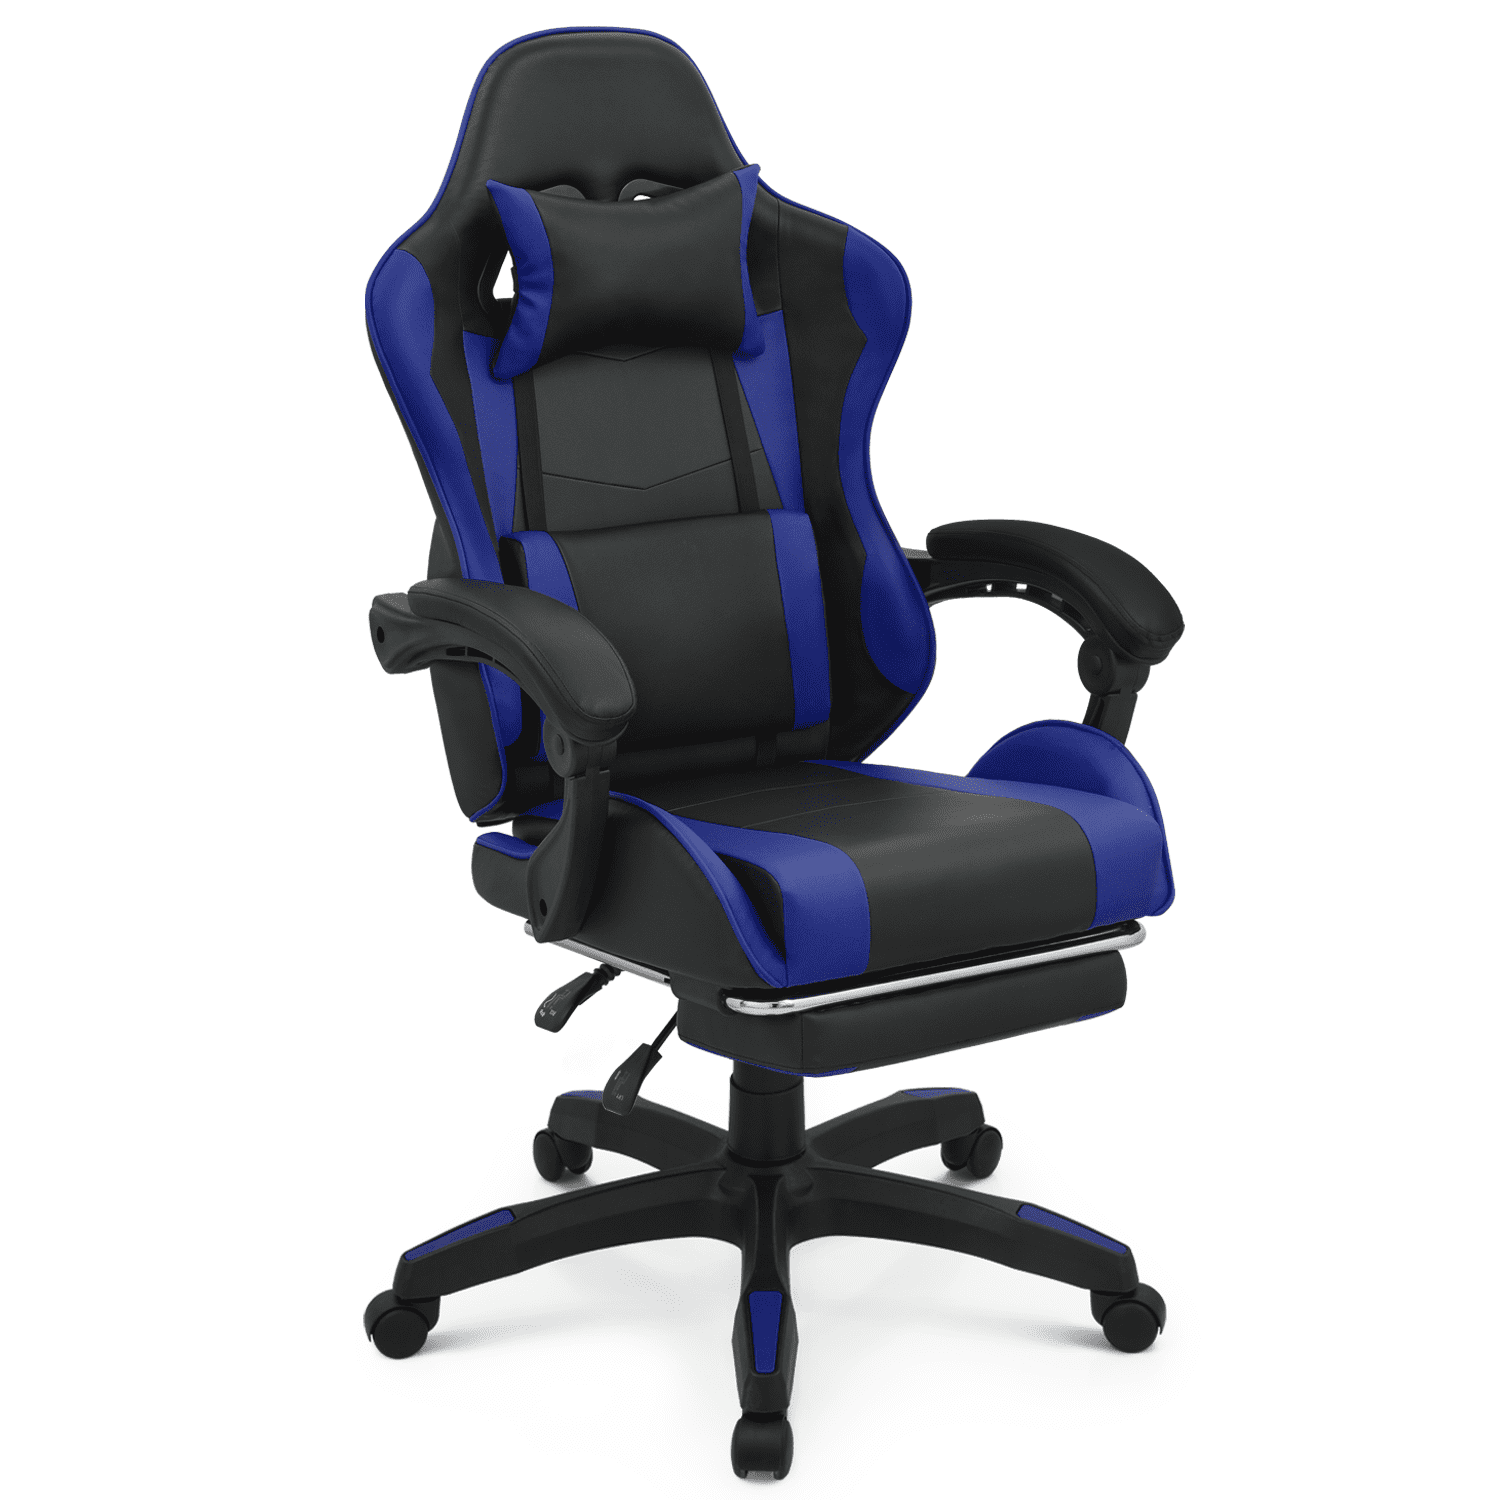 MoNiBloom Massage Video Game Chair, Recliner High Back Gaming Chair with  Lumbar Support & Footrest, Theater Seating with Speaker, Black